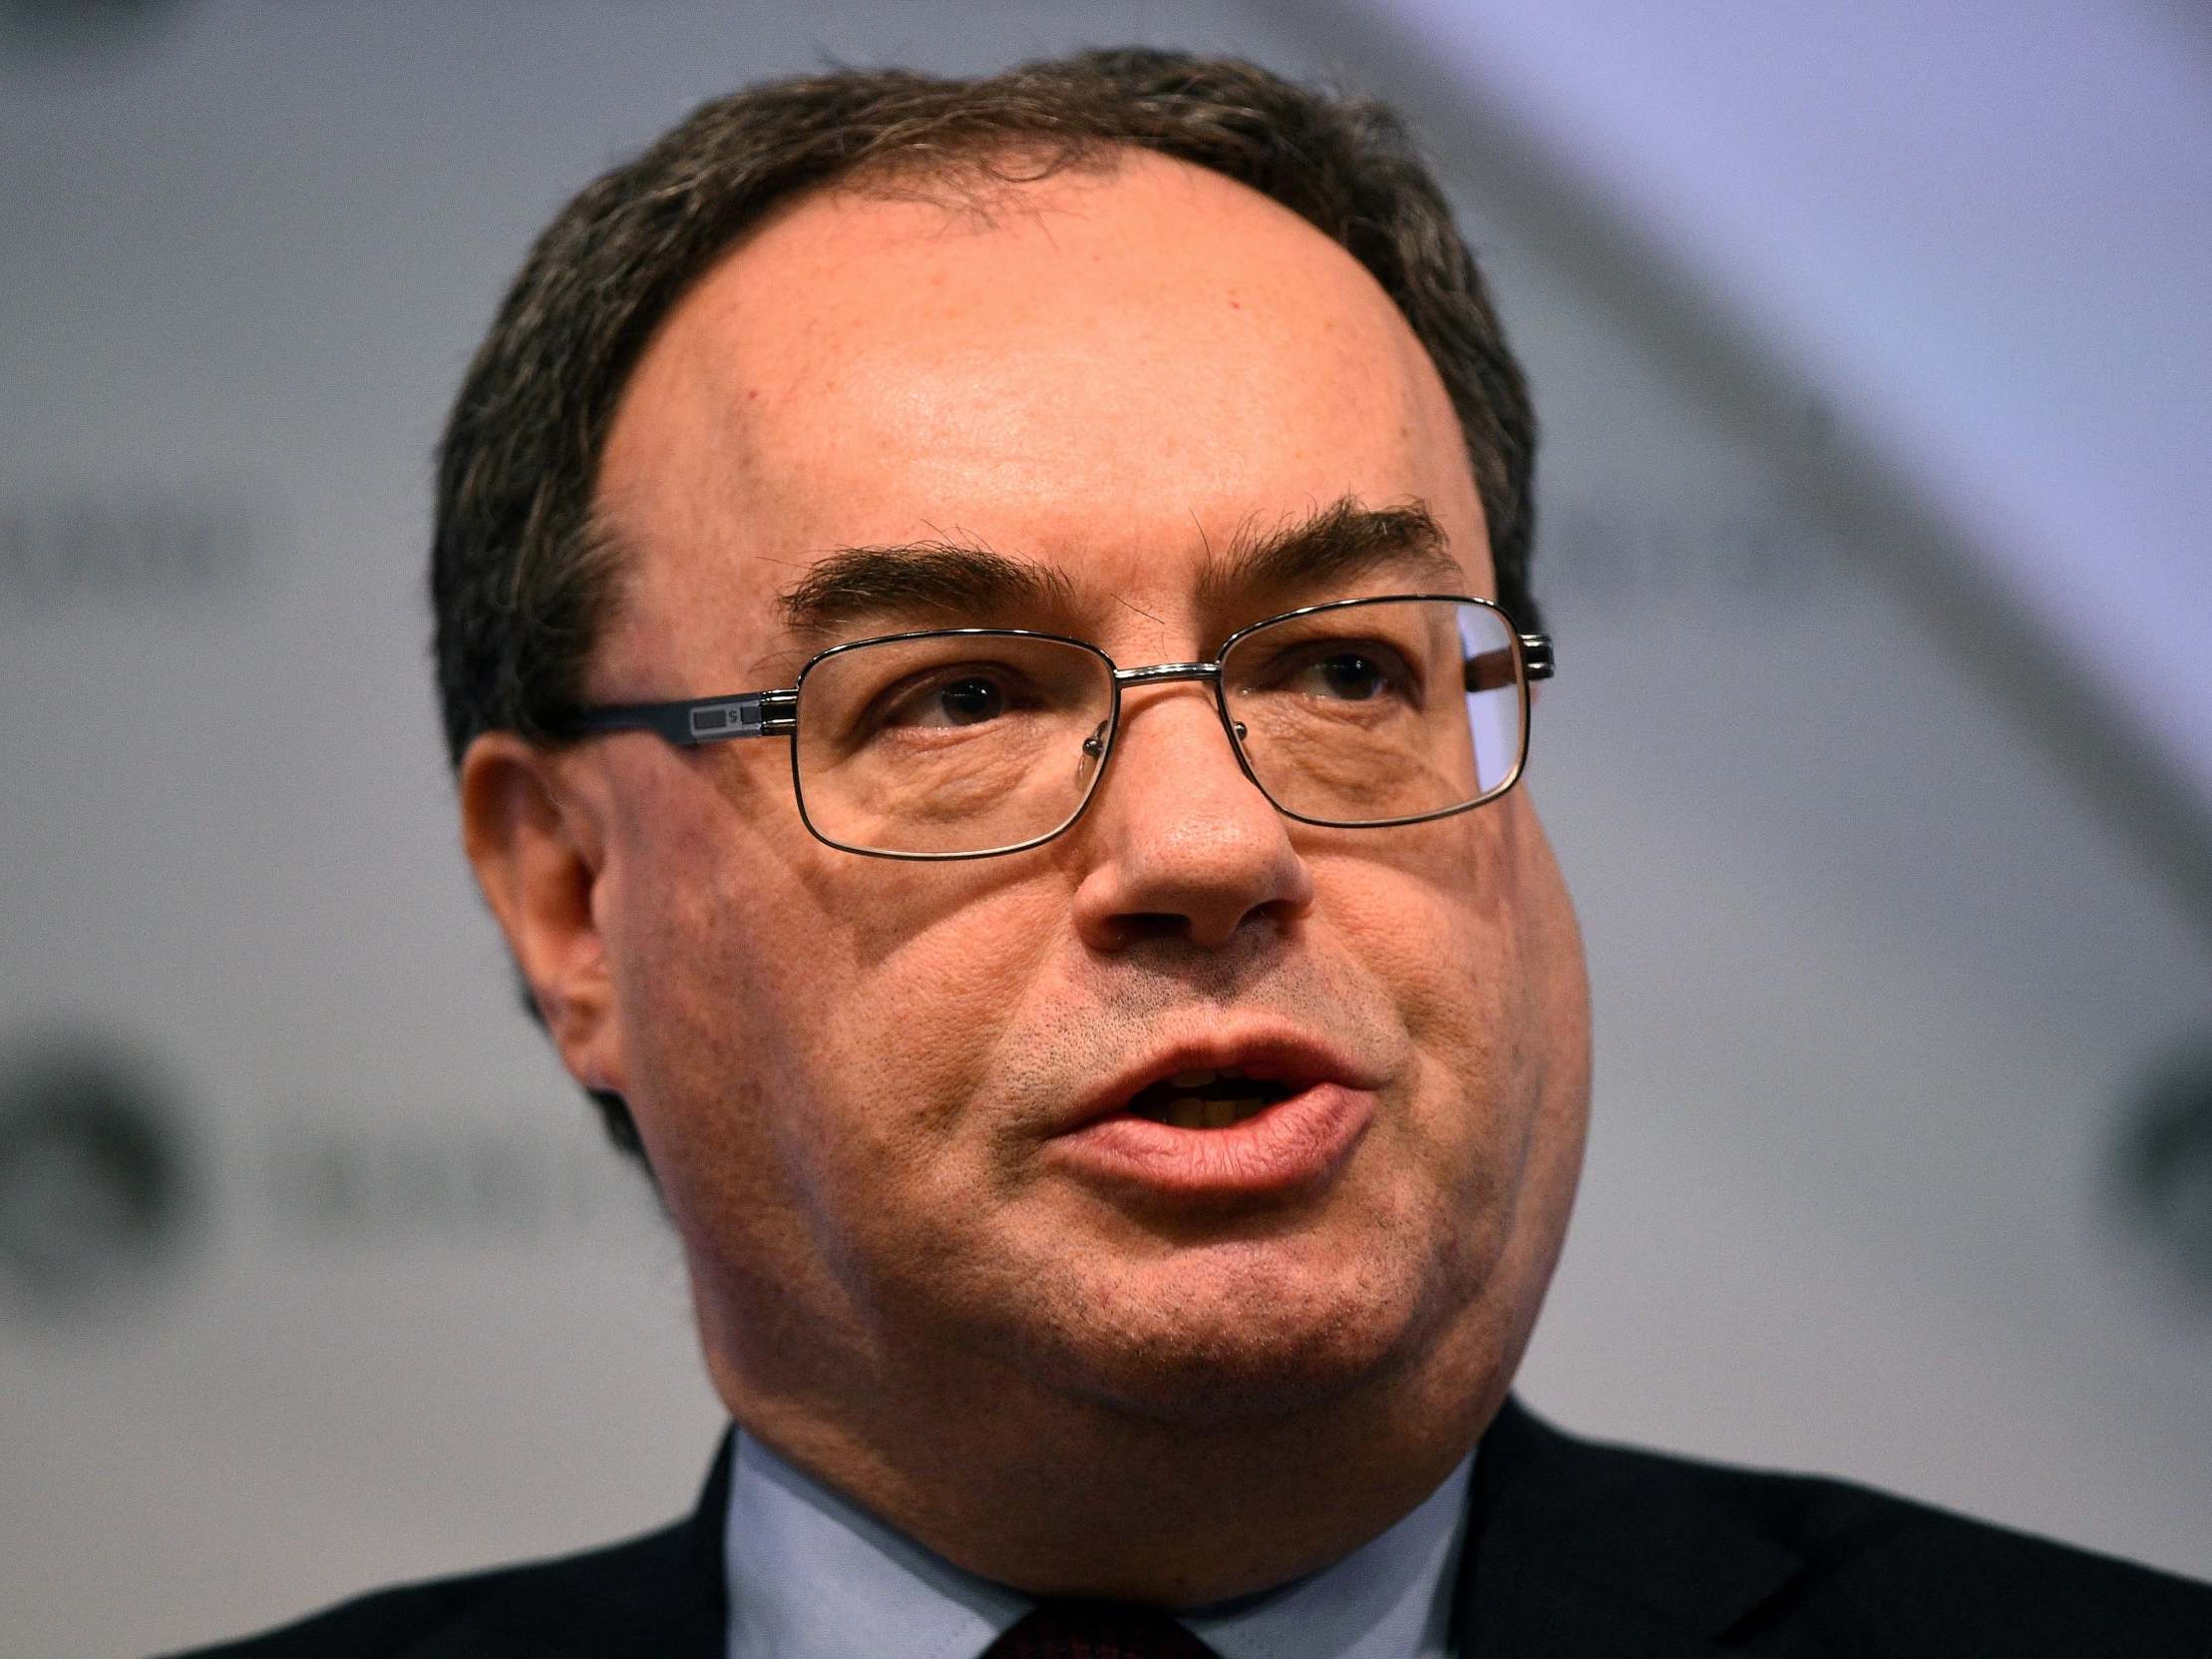 Andrew Bailey, former chief executive of the Financial Conduct Authority, and now Bank of England governor